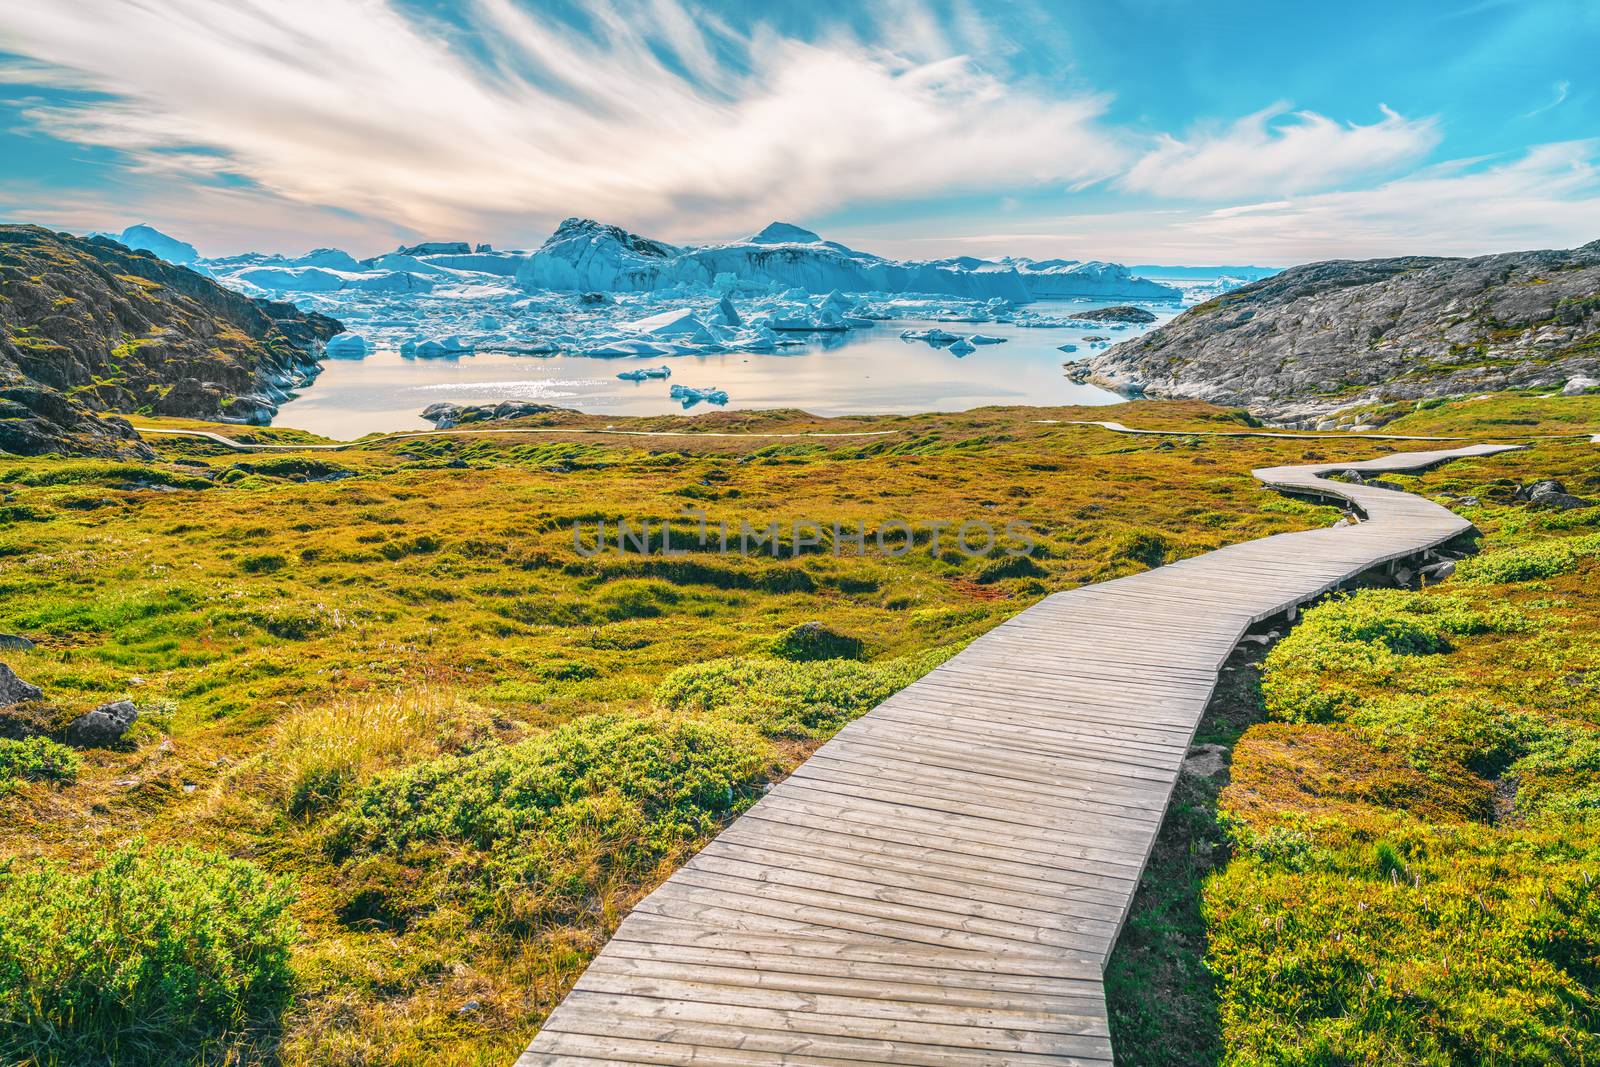 Hiking trail path in Greenland arctic nature landscape with icebergs in Ilulissat icefjord by Maridav